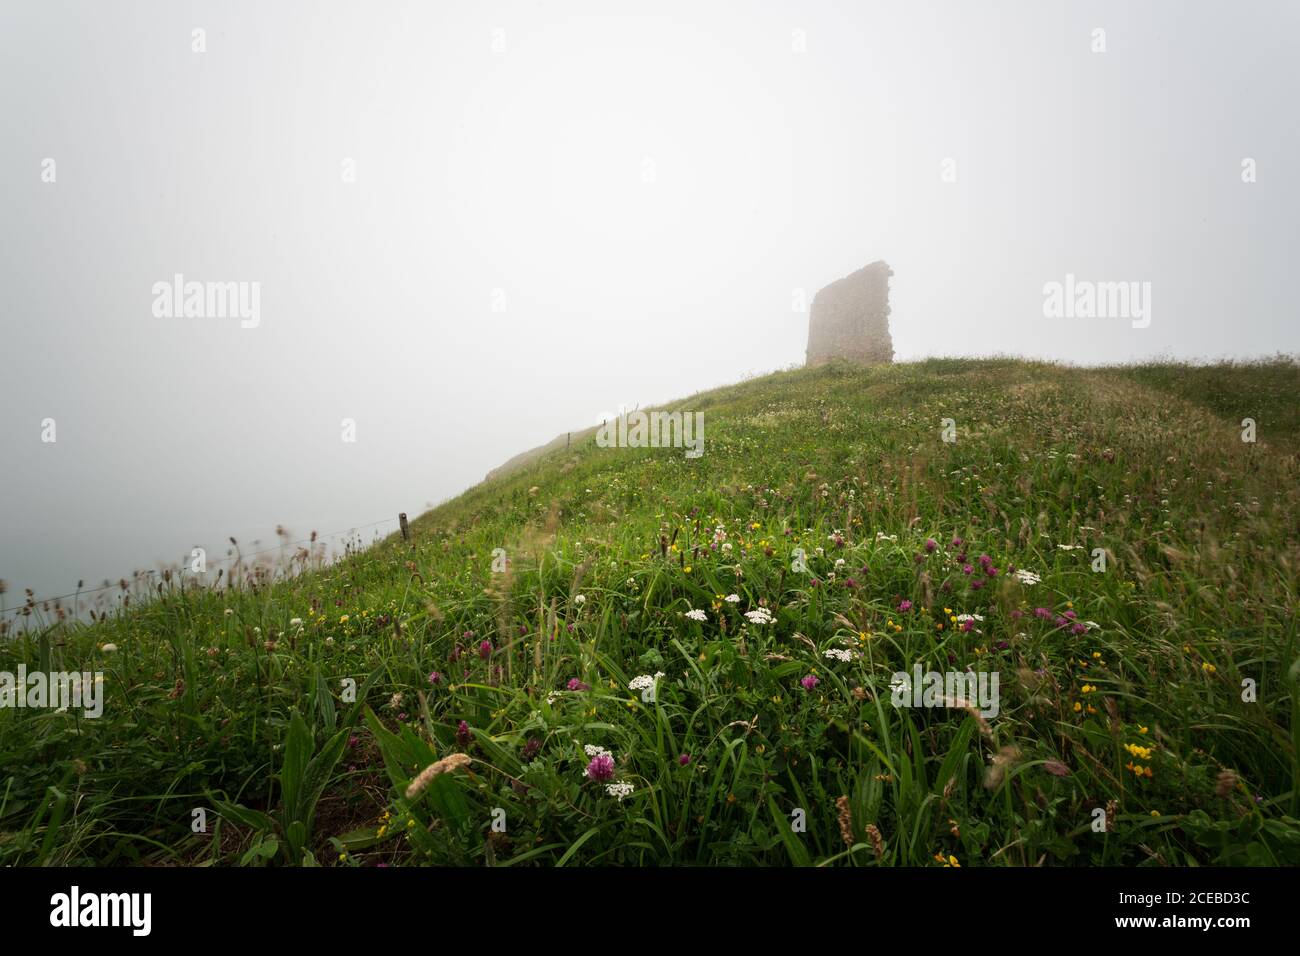 Spectacular view of vague structure on top of grassy hill on foggy day Stock Photo